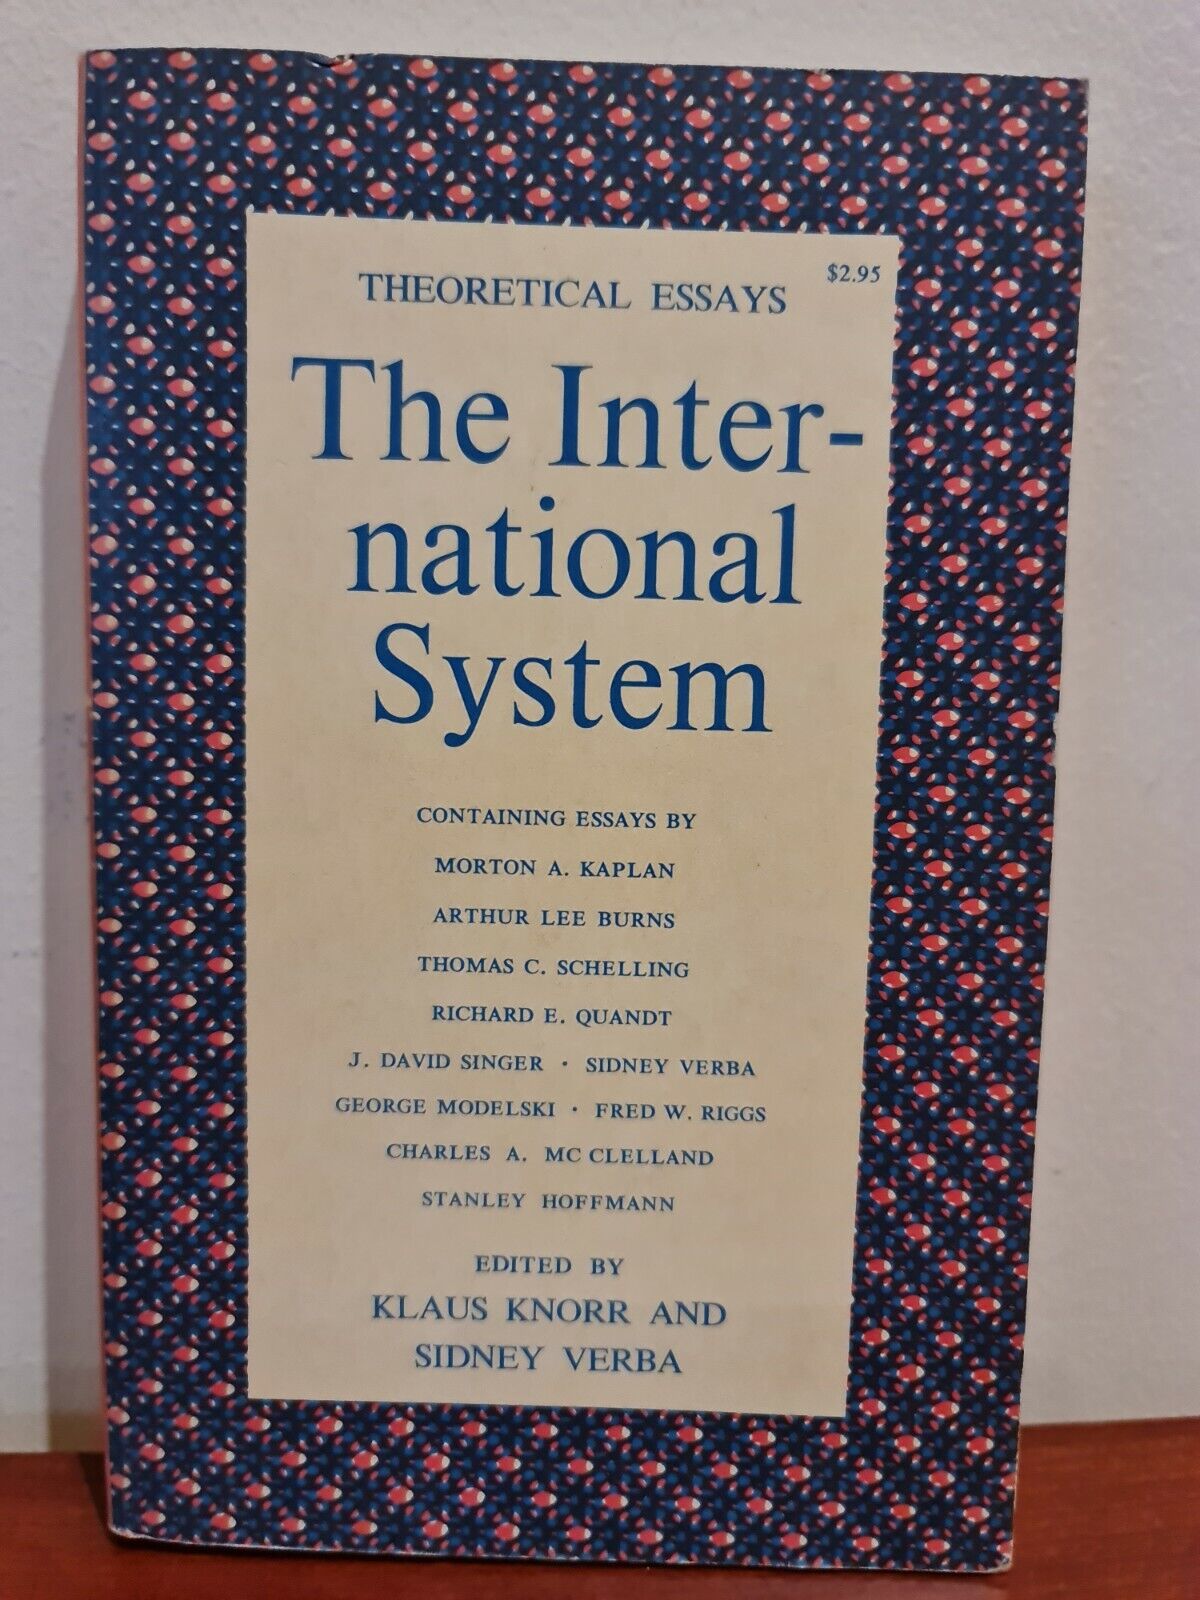 Theoretical Essays; The International System by Klaus Knorr (1967)